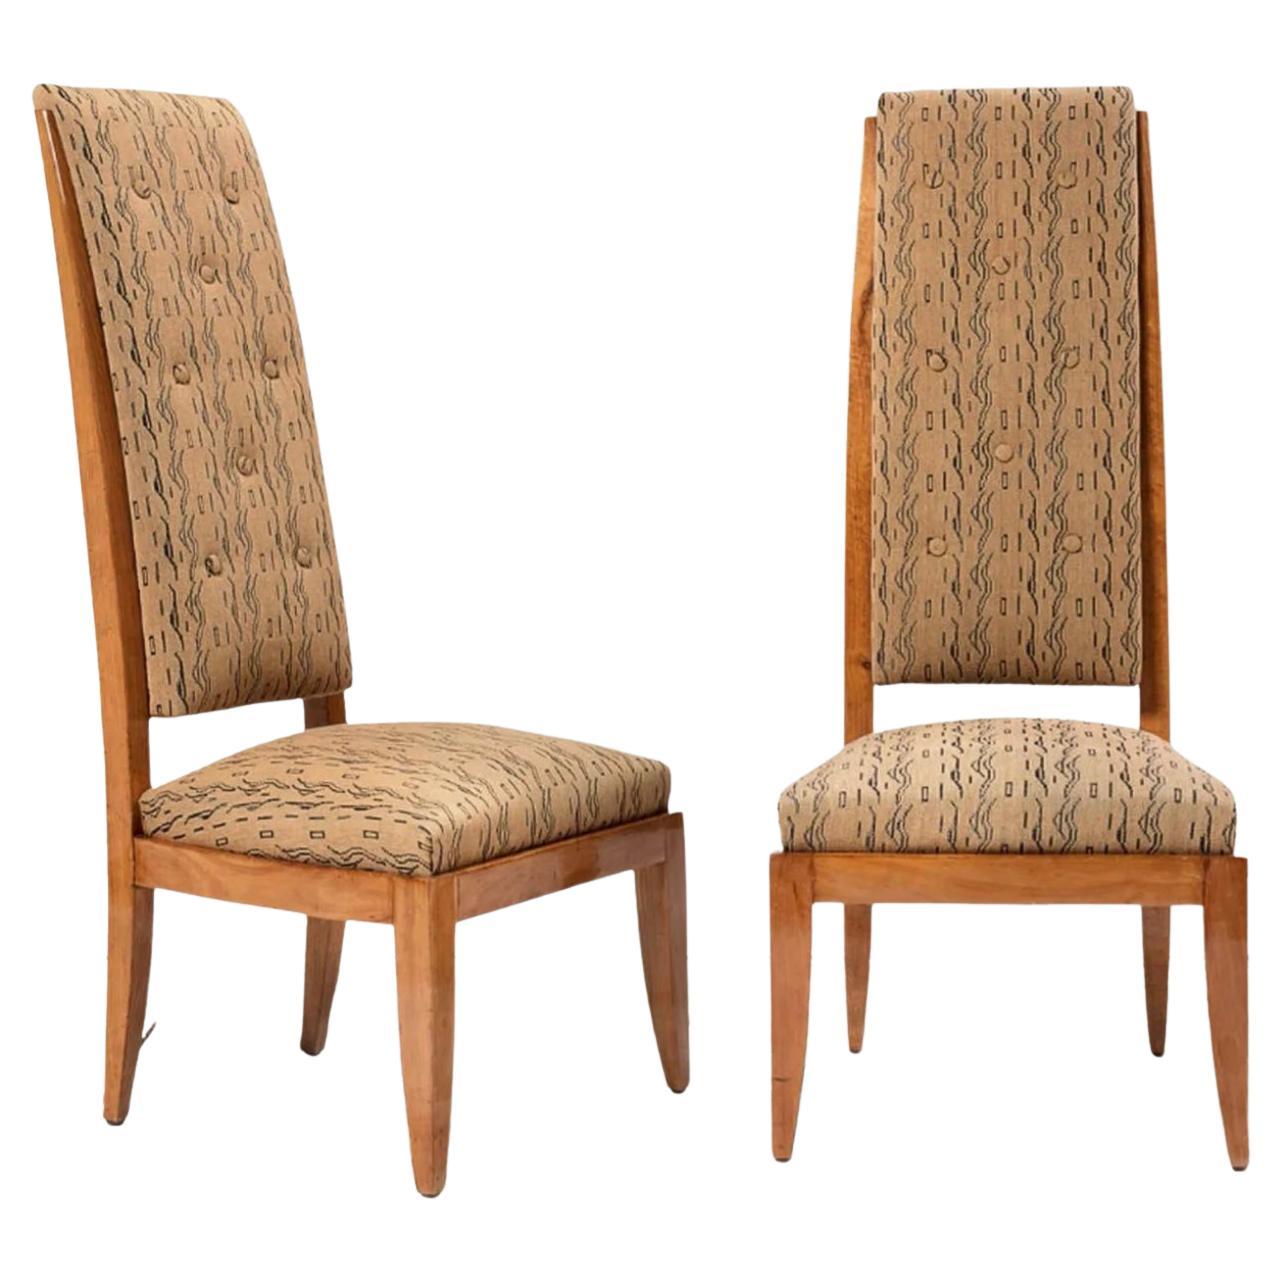 1940s Pair of Fireside Chairs in Blond Mahogany attributed to Maison Dominique